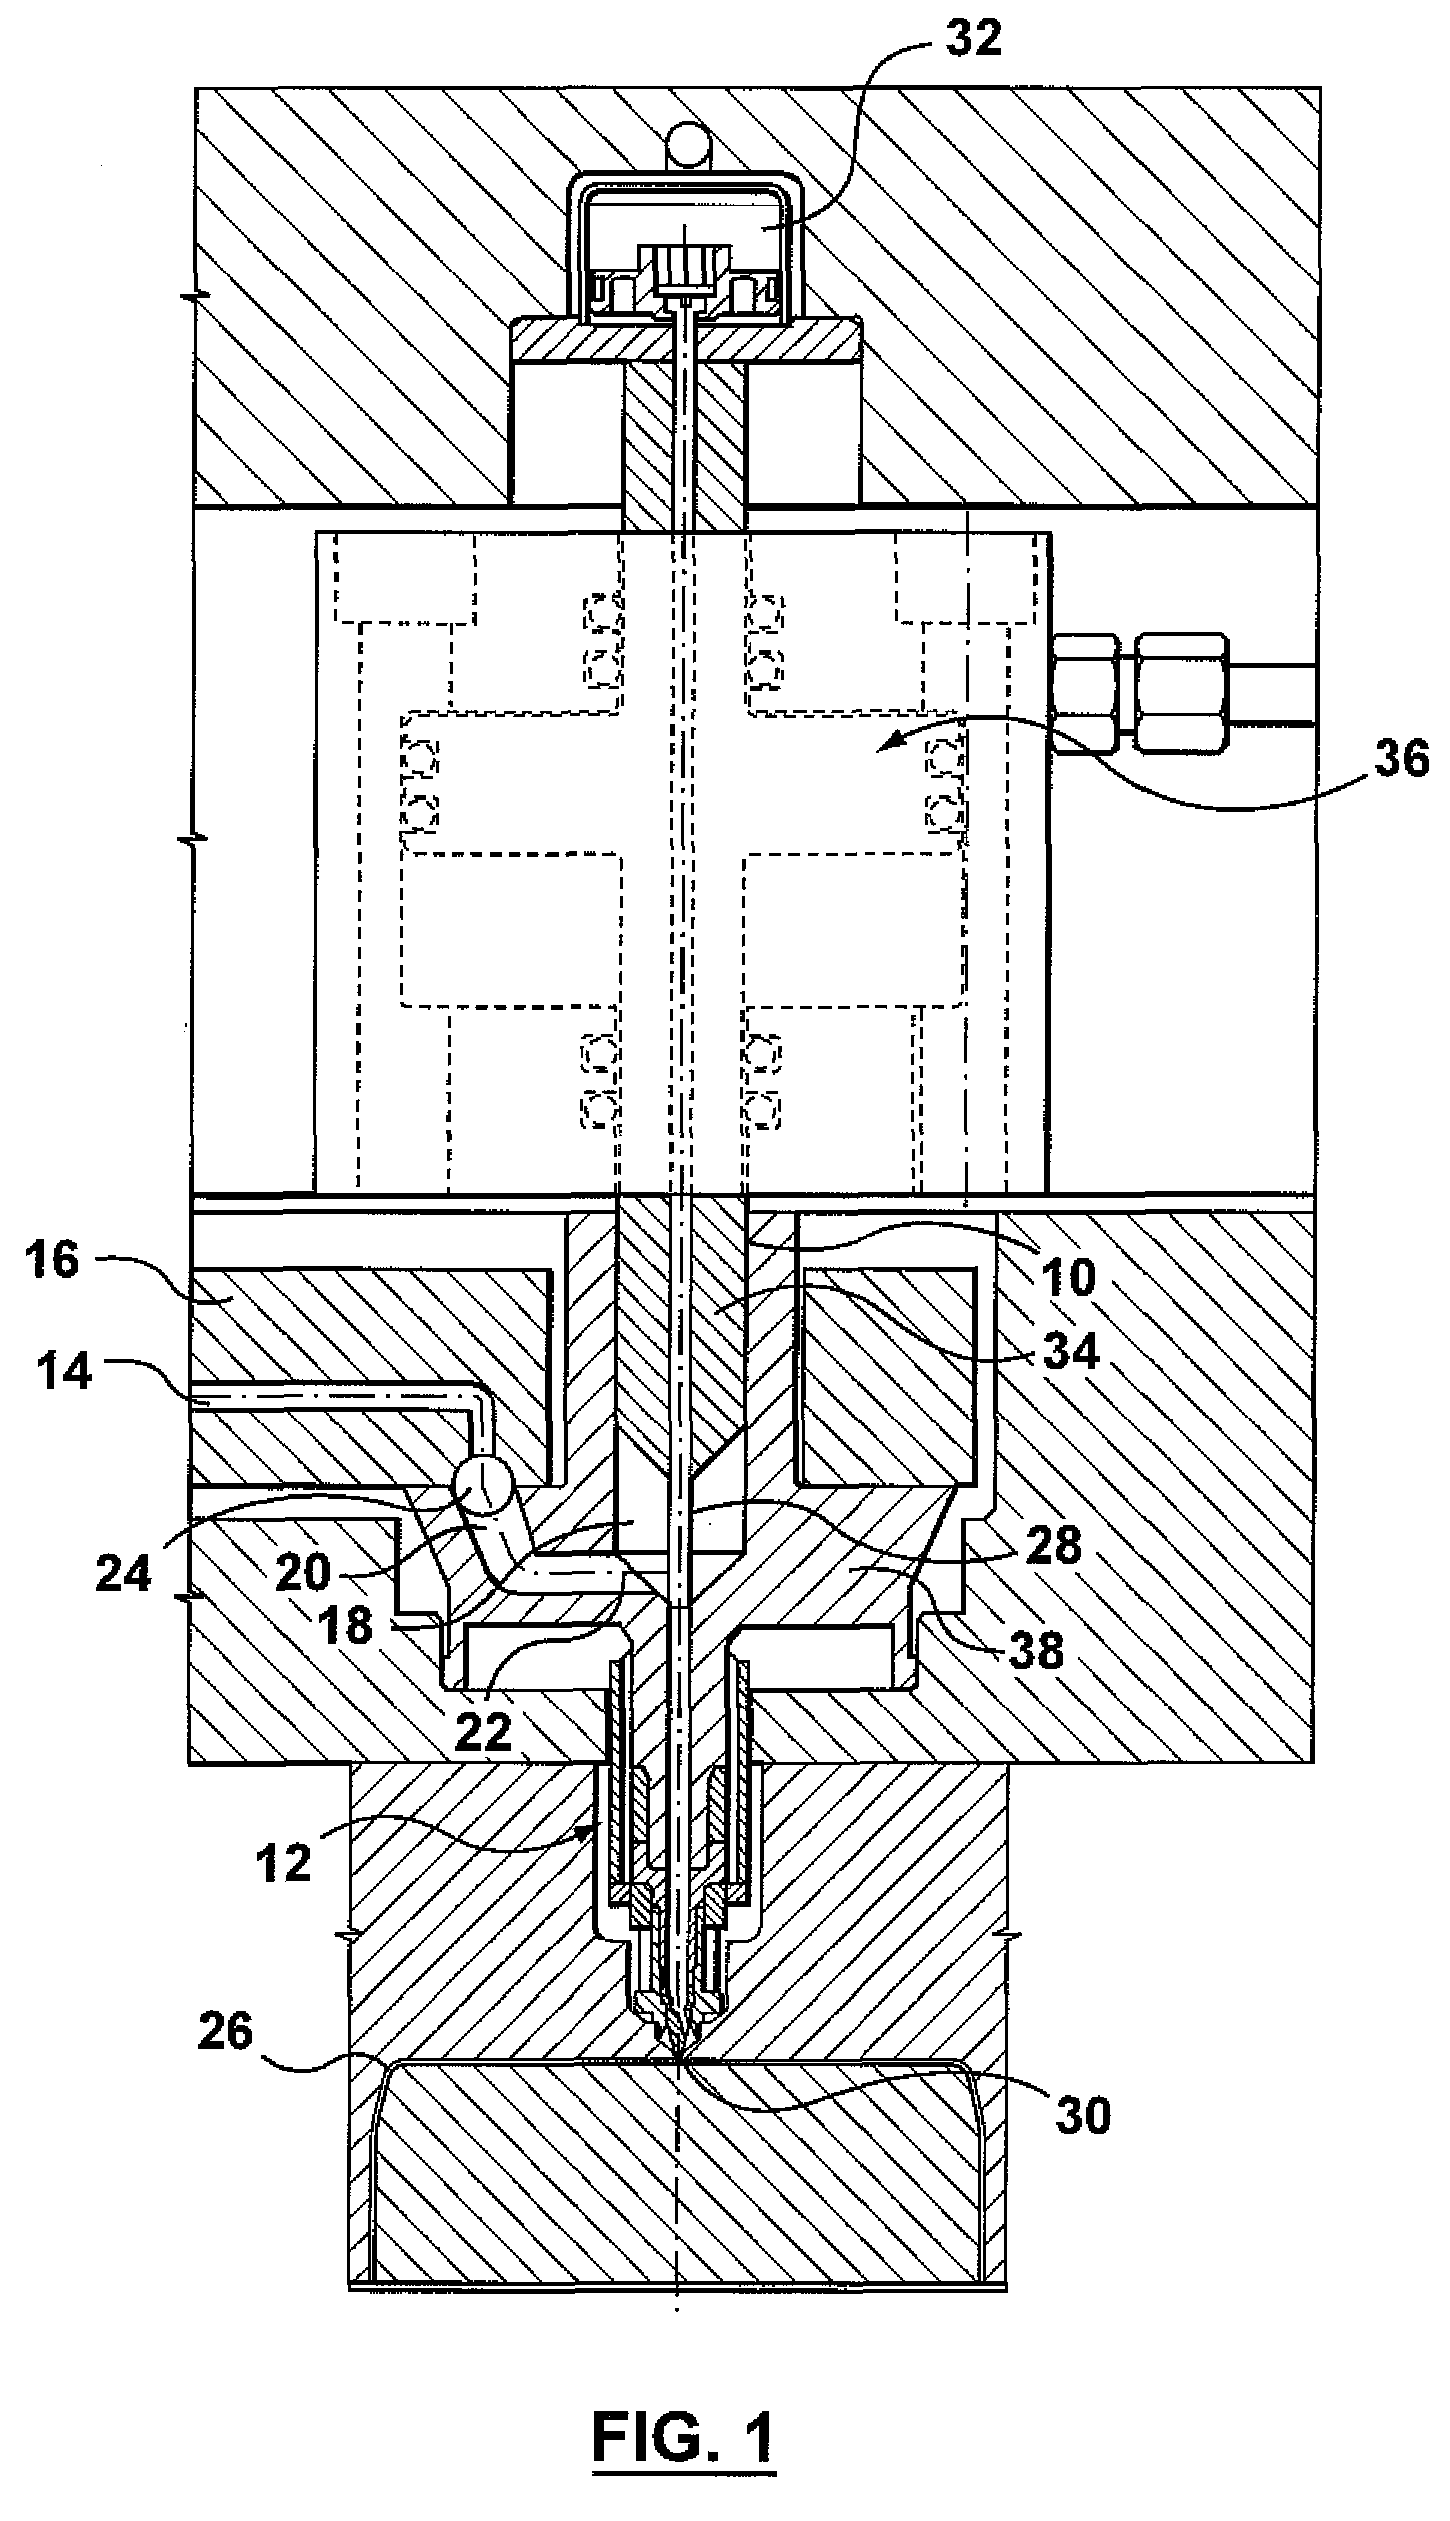 High pressure injection molding nozzle with low pressure manifold